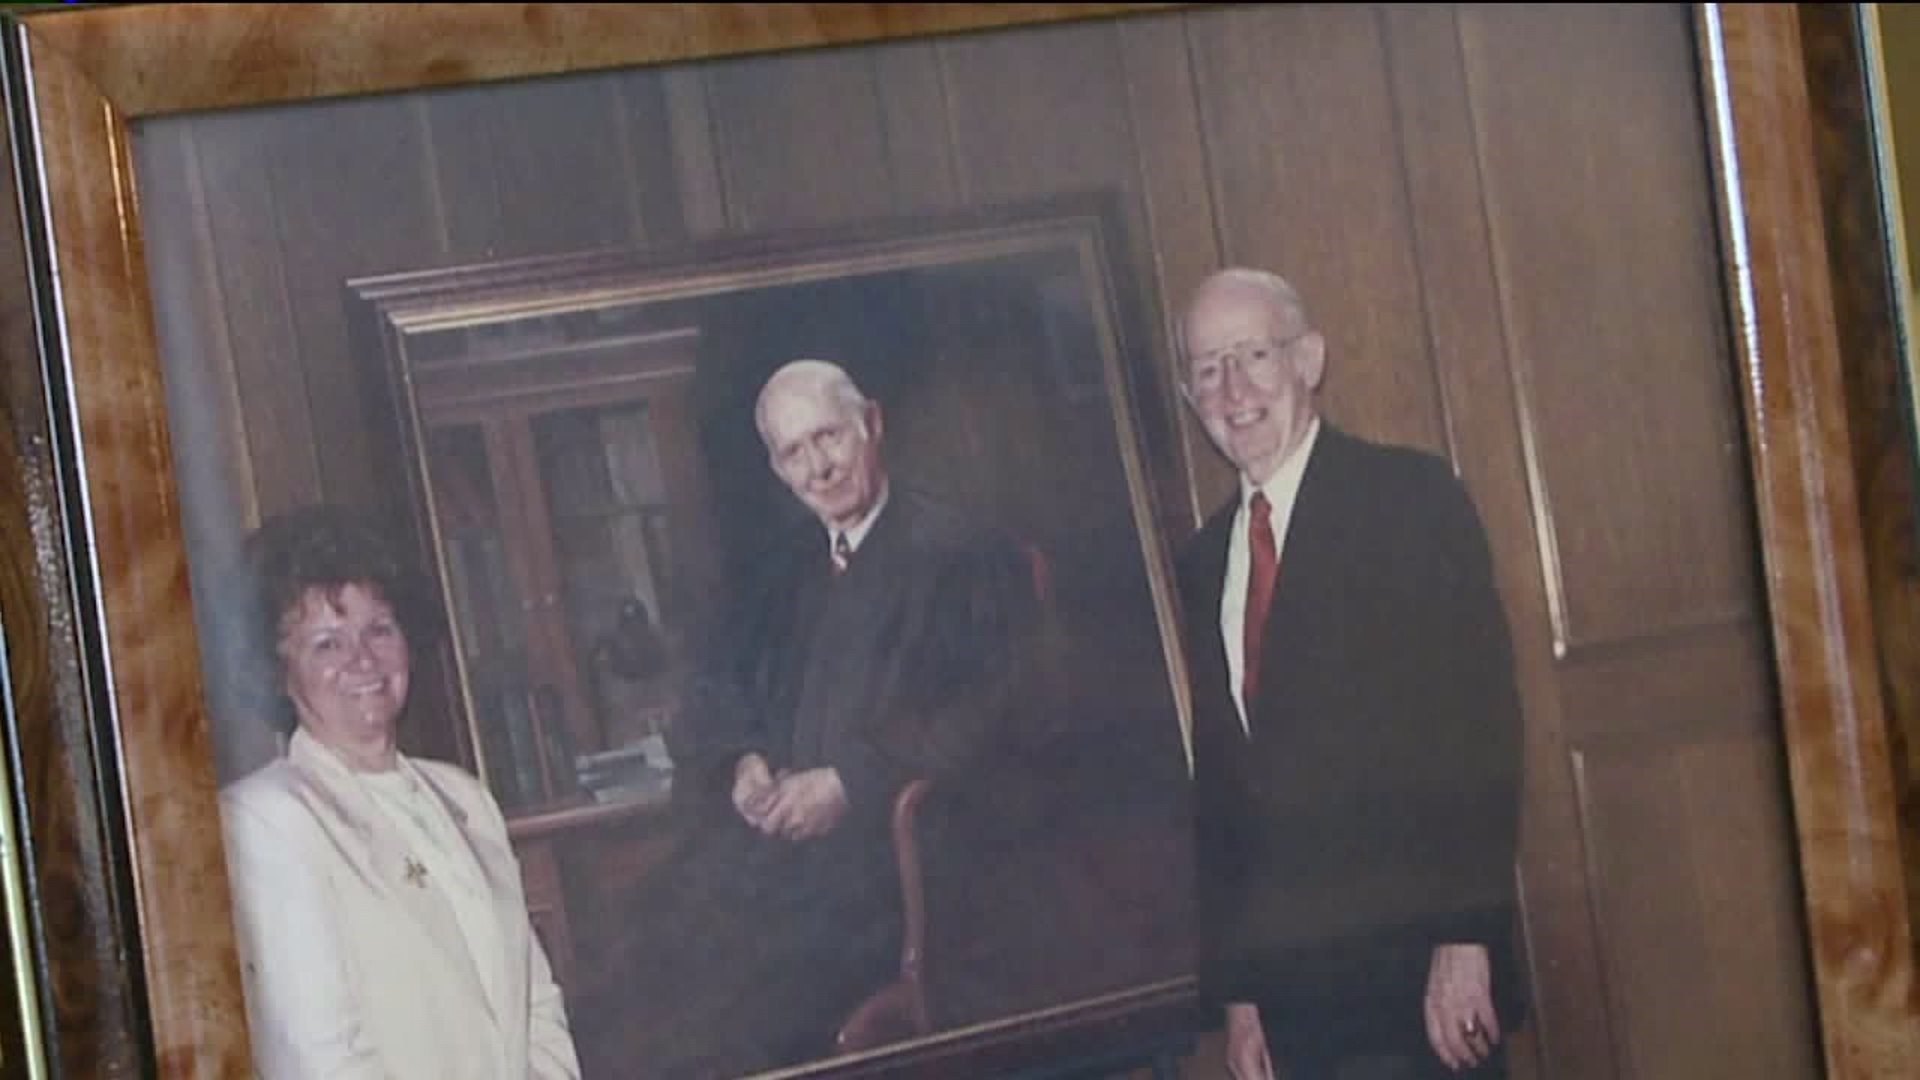 Mourners Pay Respects to Longtime Judge in Scranton